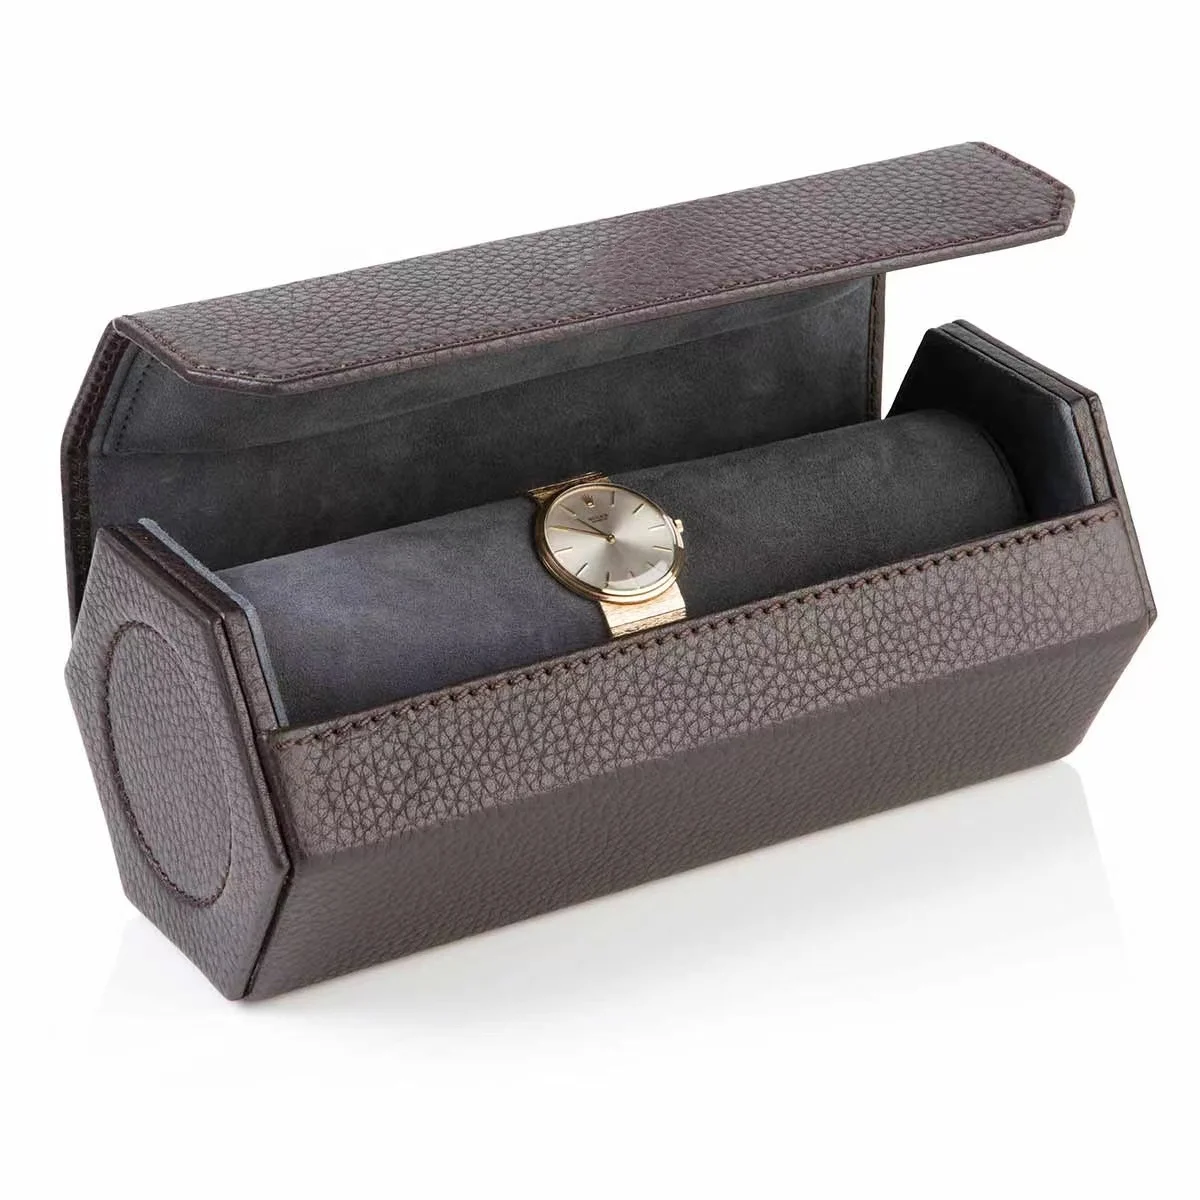 

Guangzhou Manufacturer Wholesale PU Leather High Quality Travel Watch Roll Case Box for 3 Watches, Customized